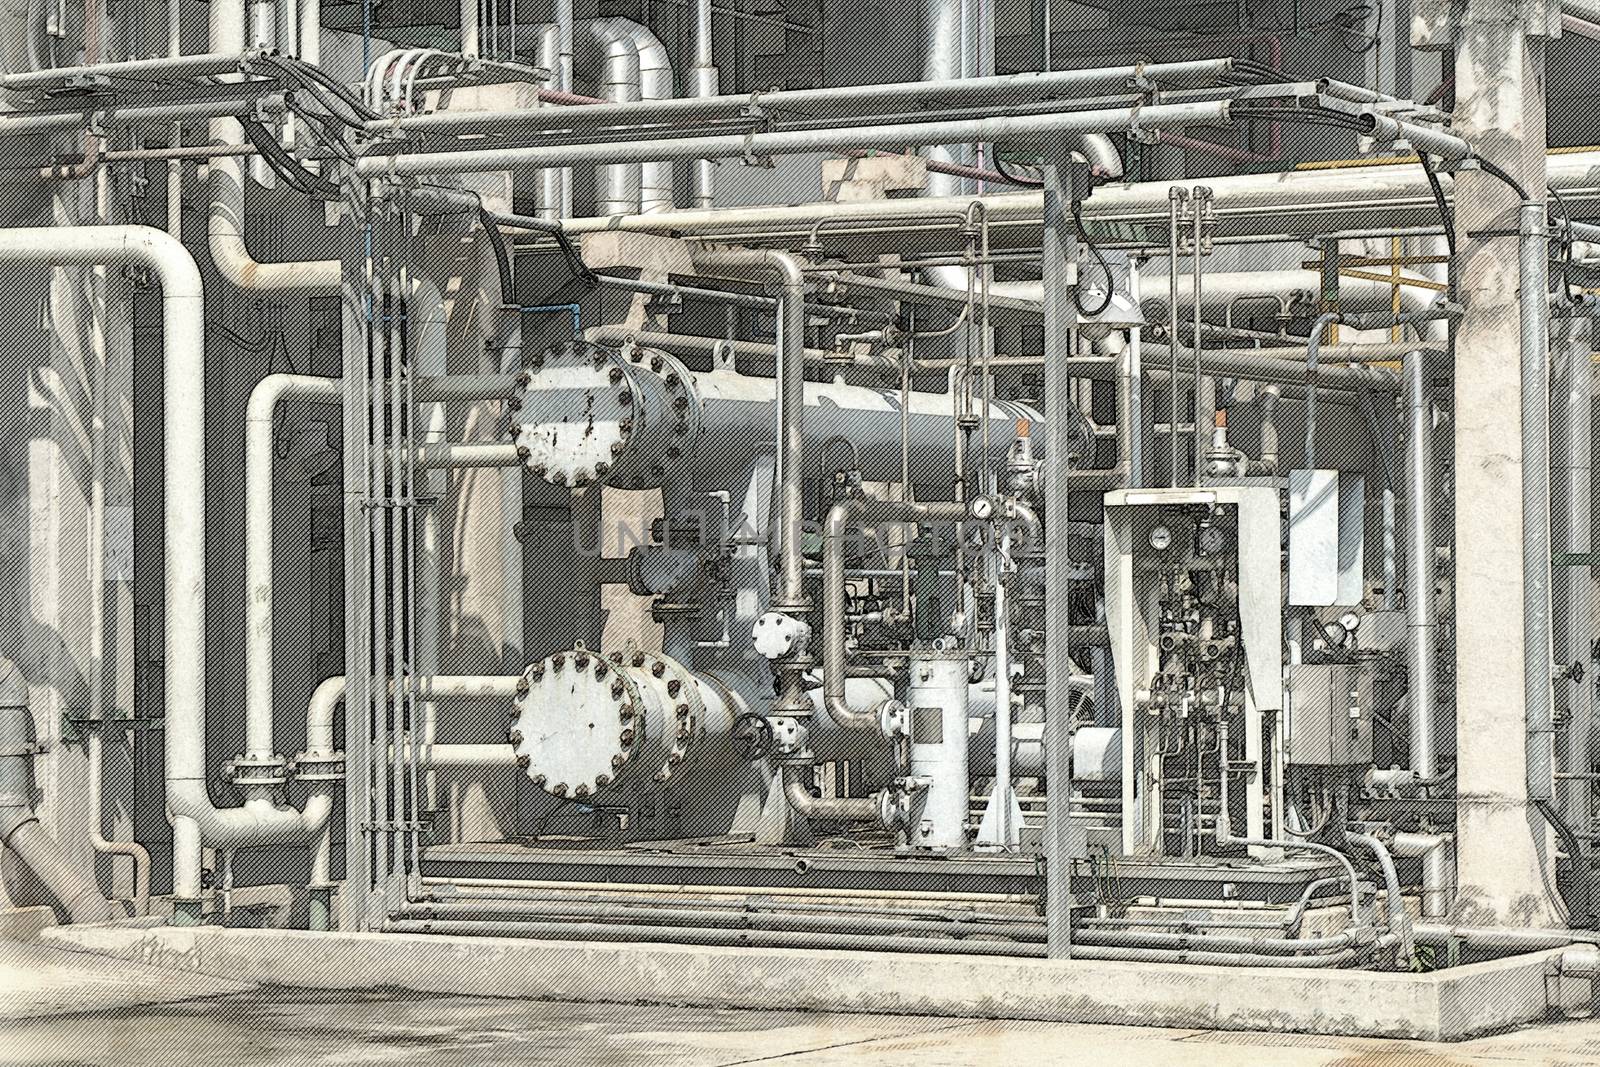 Sketch of the pipe in the Refinery industry.